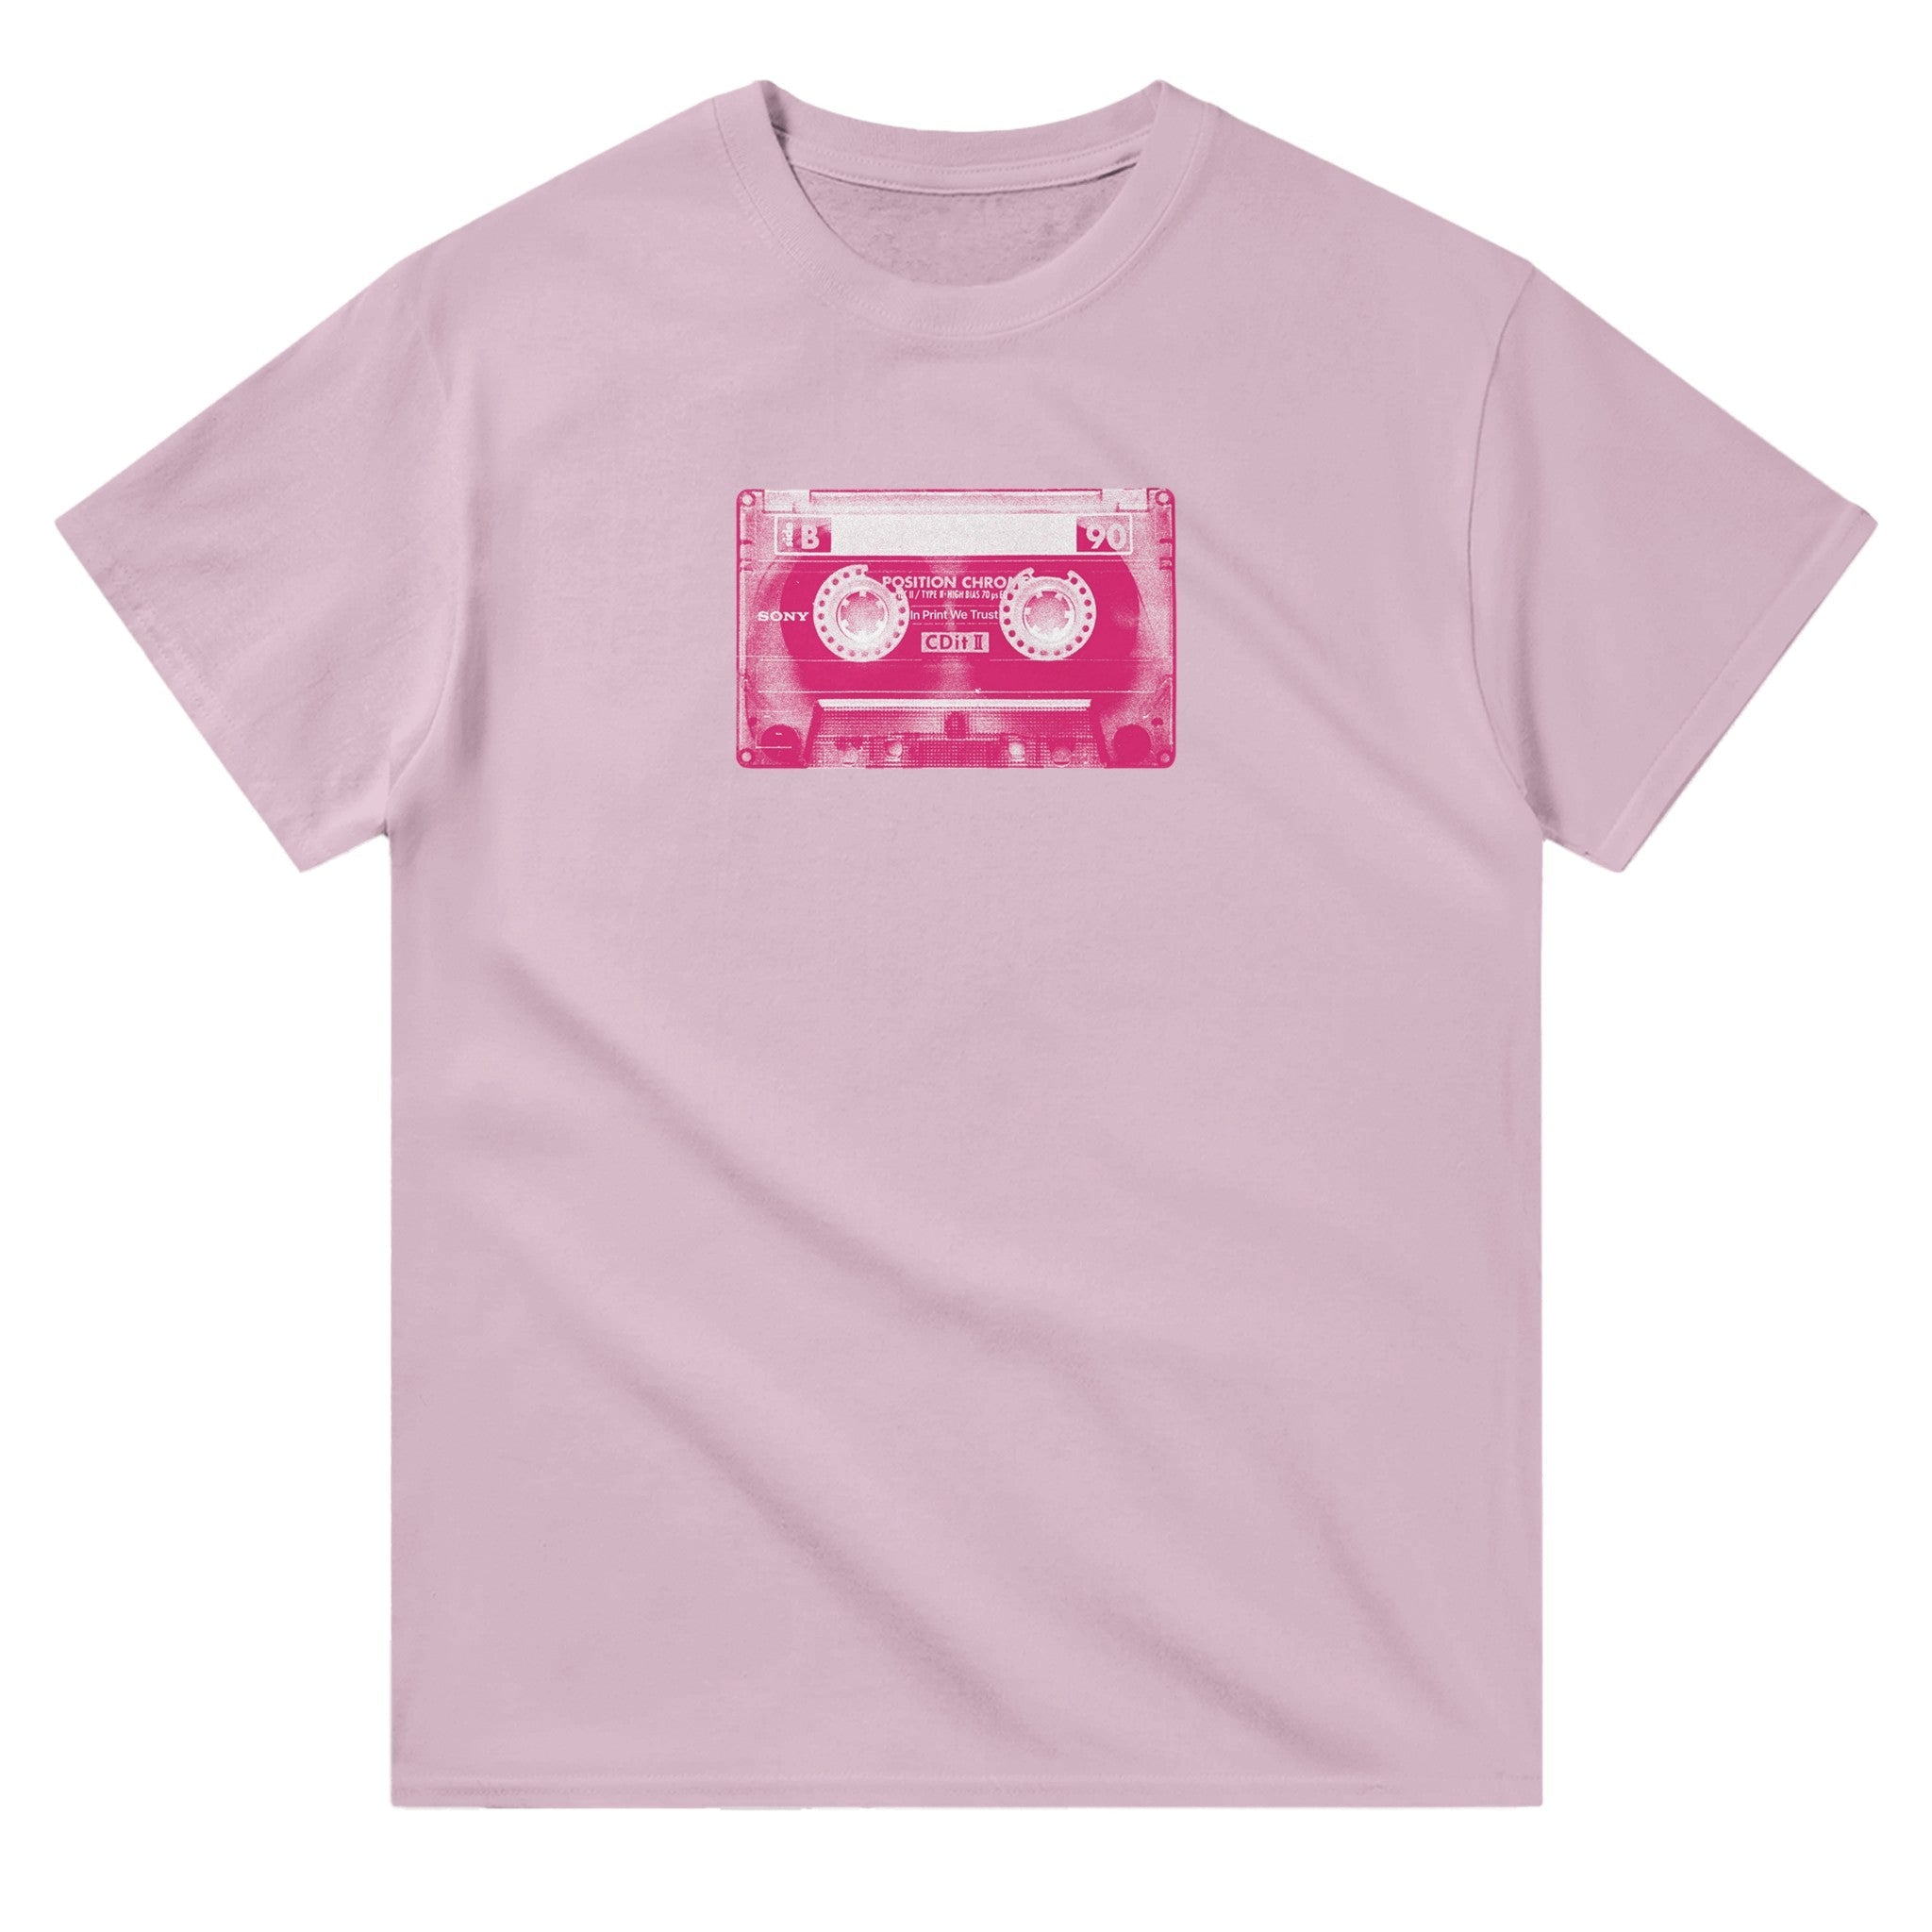 'Face the Music' classic tee - In Print We Trust